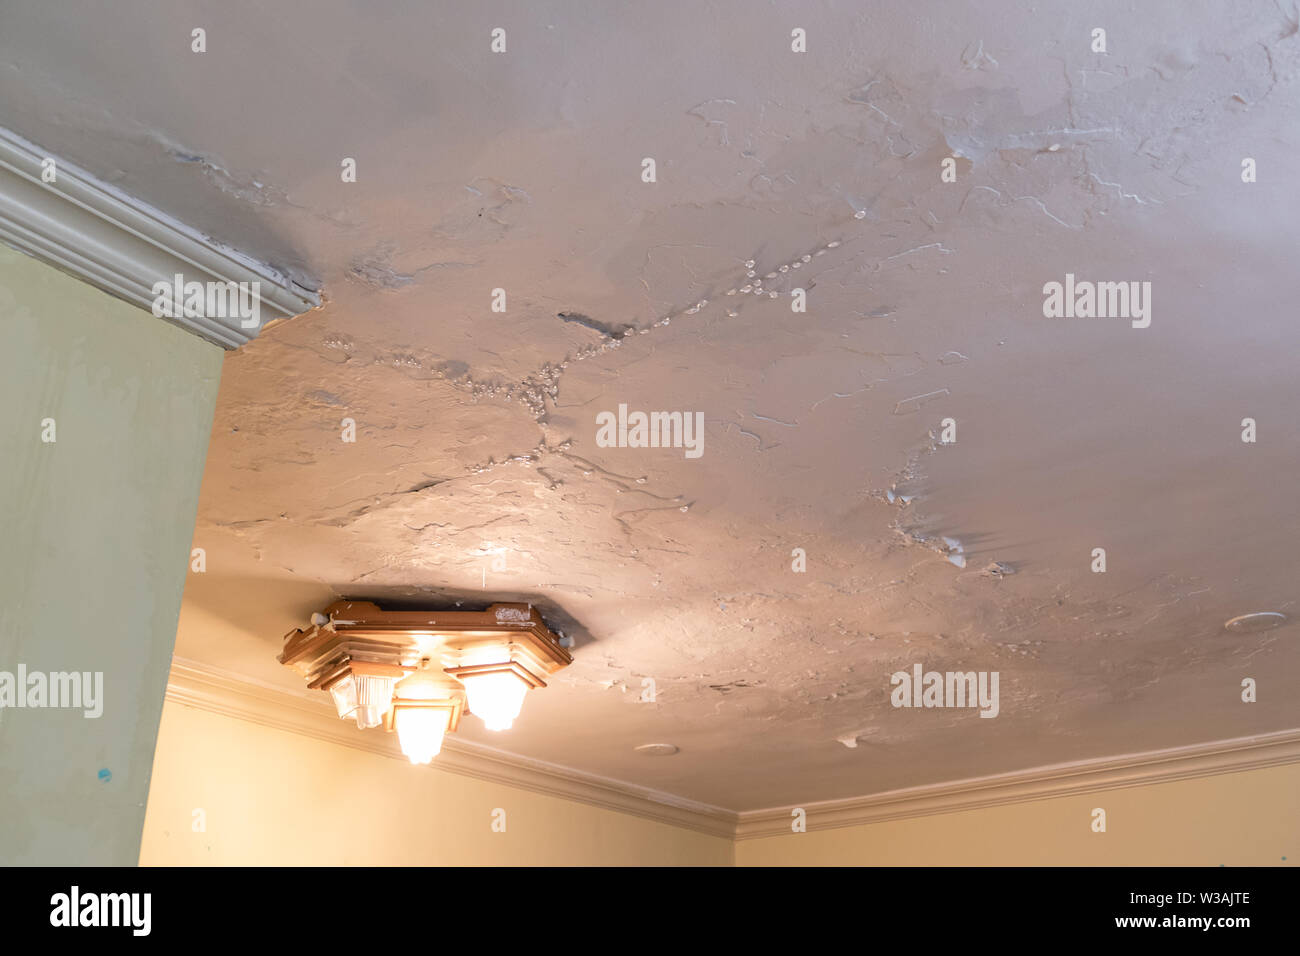 Water Dripping From Leaking Ceiling Water Damge Concept